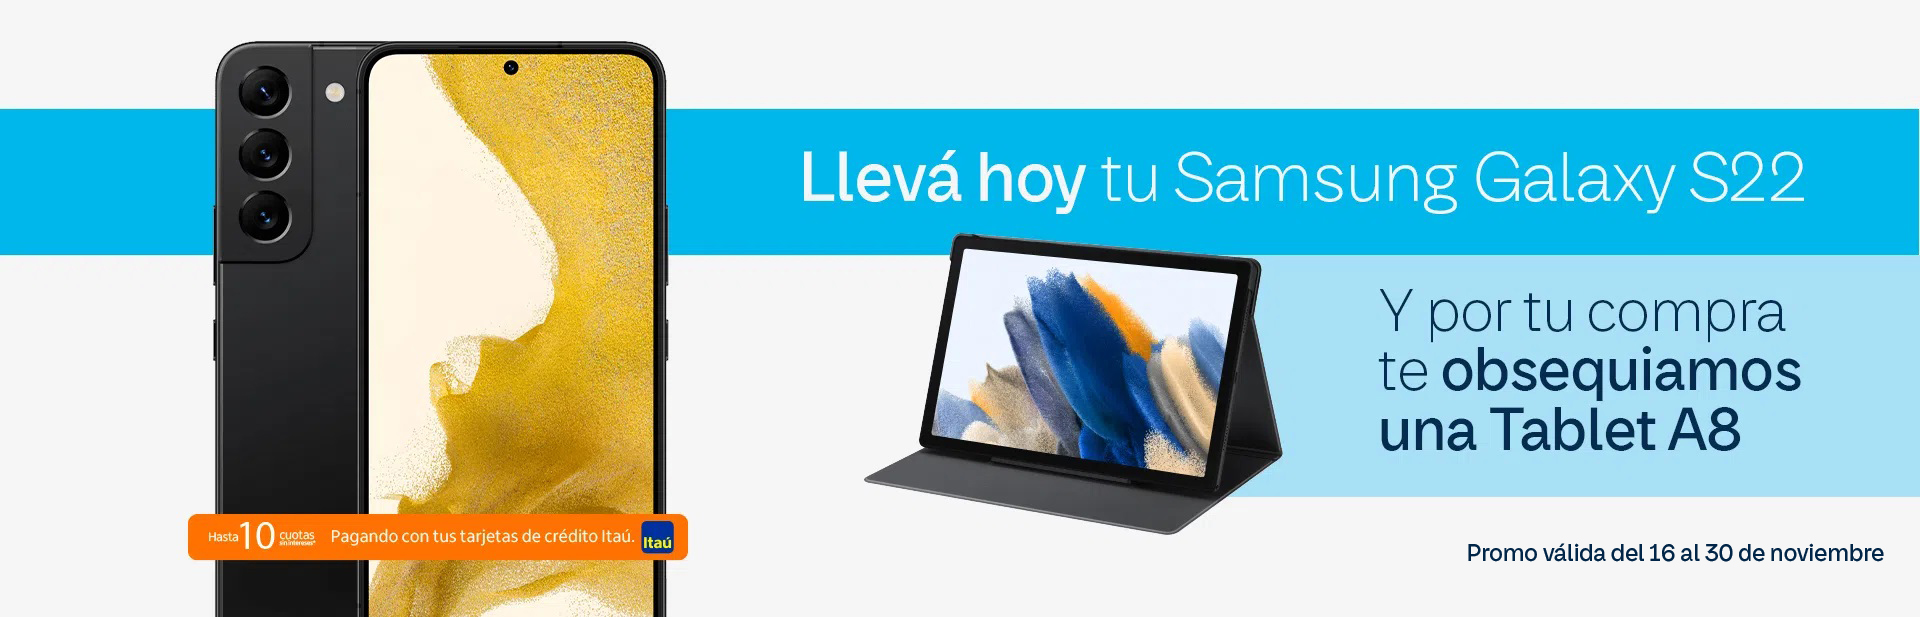 PROMO-S22-TABLET